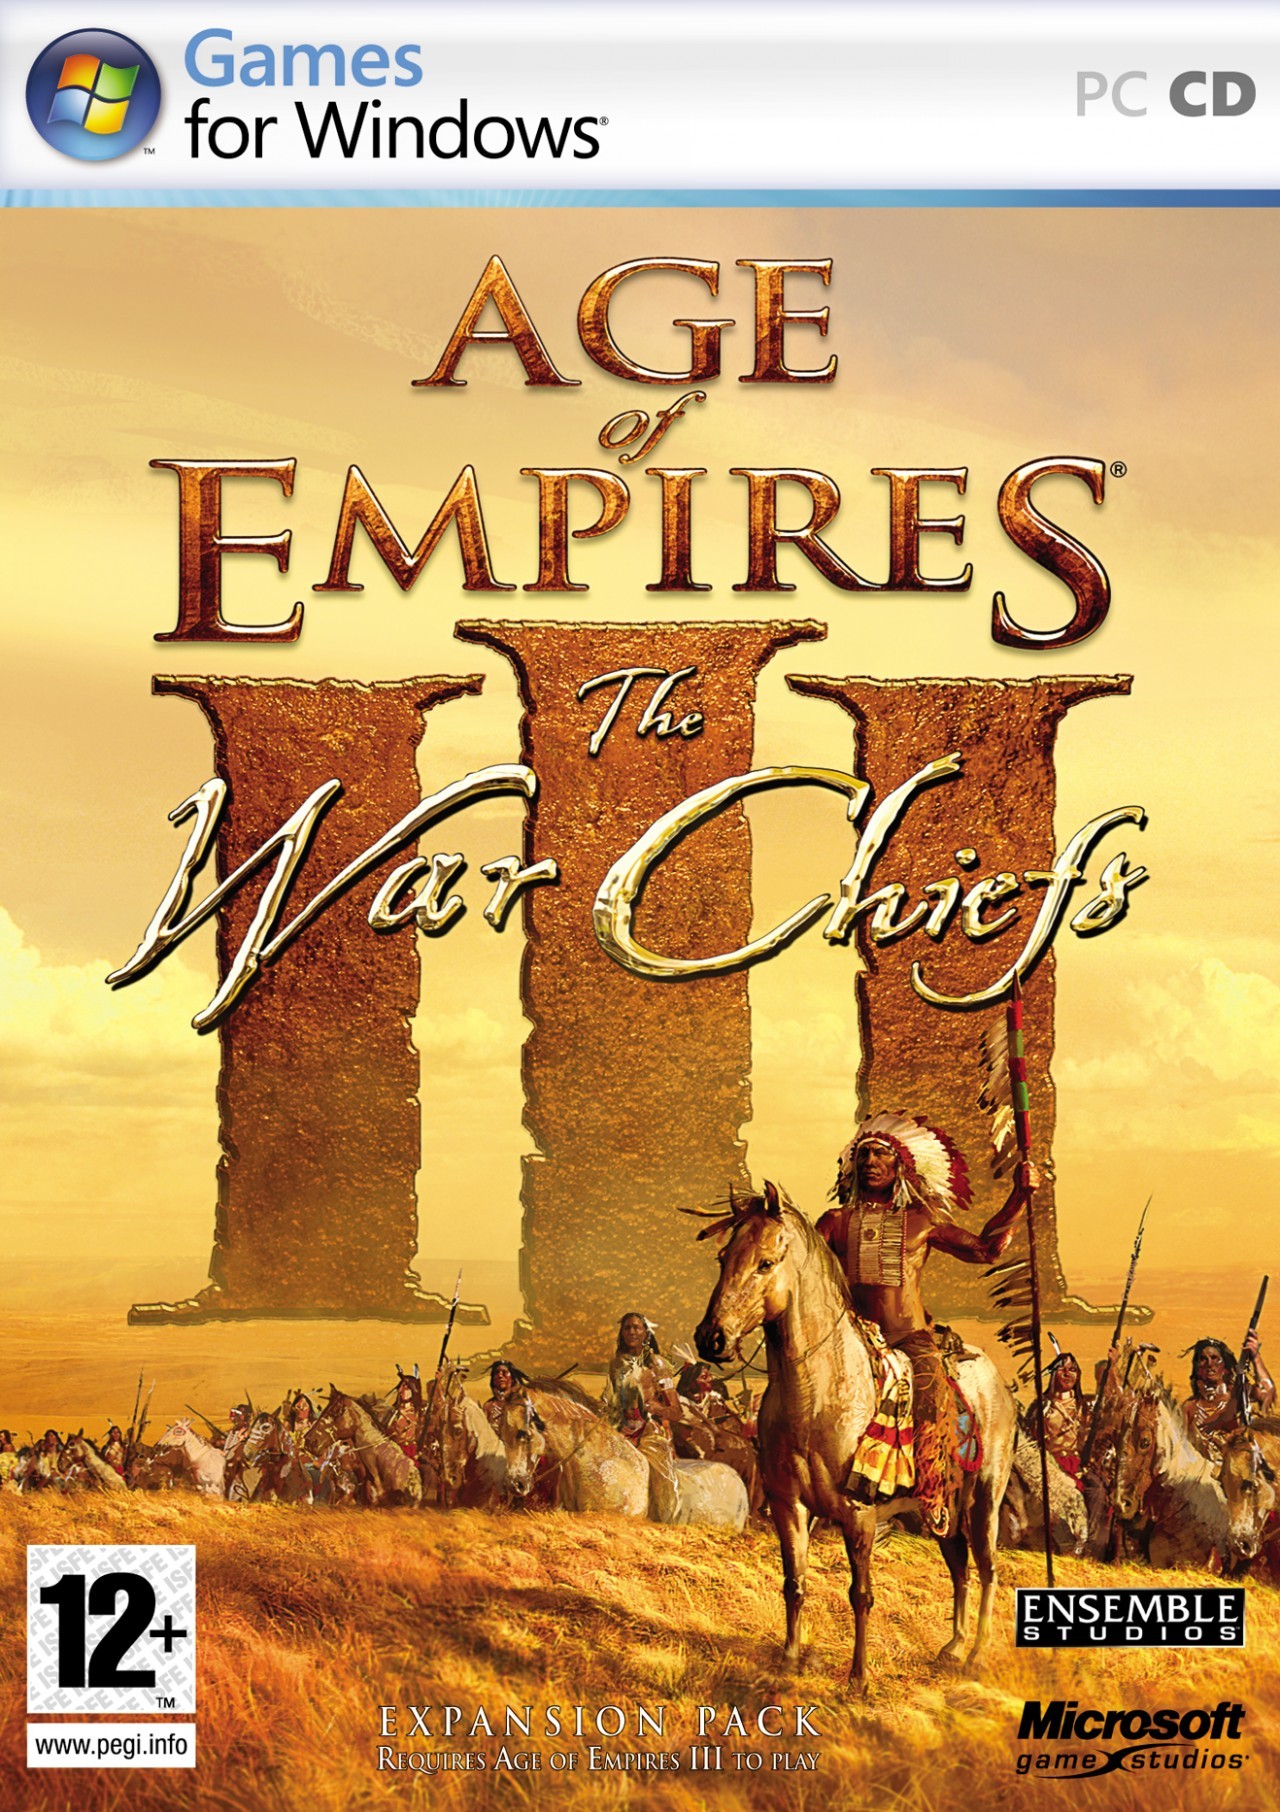 age of empires 3 war chiefs product keys